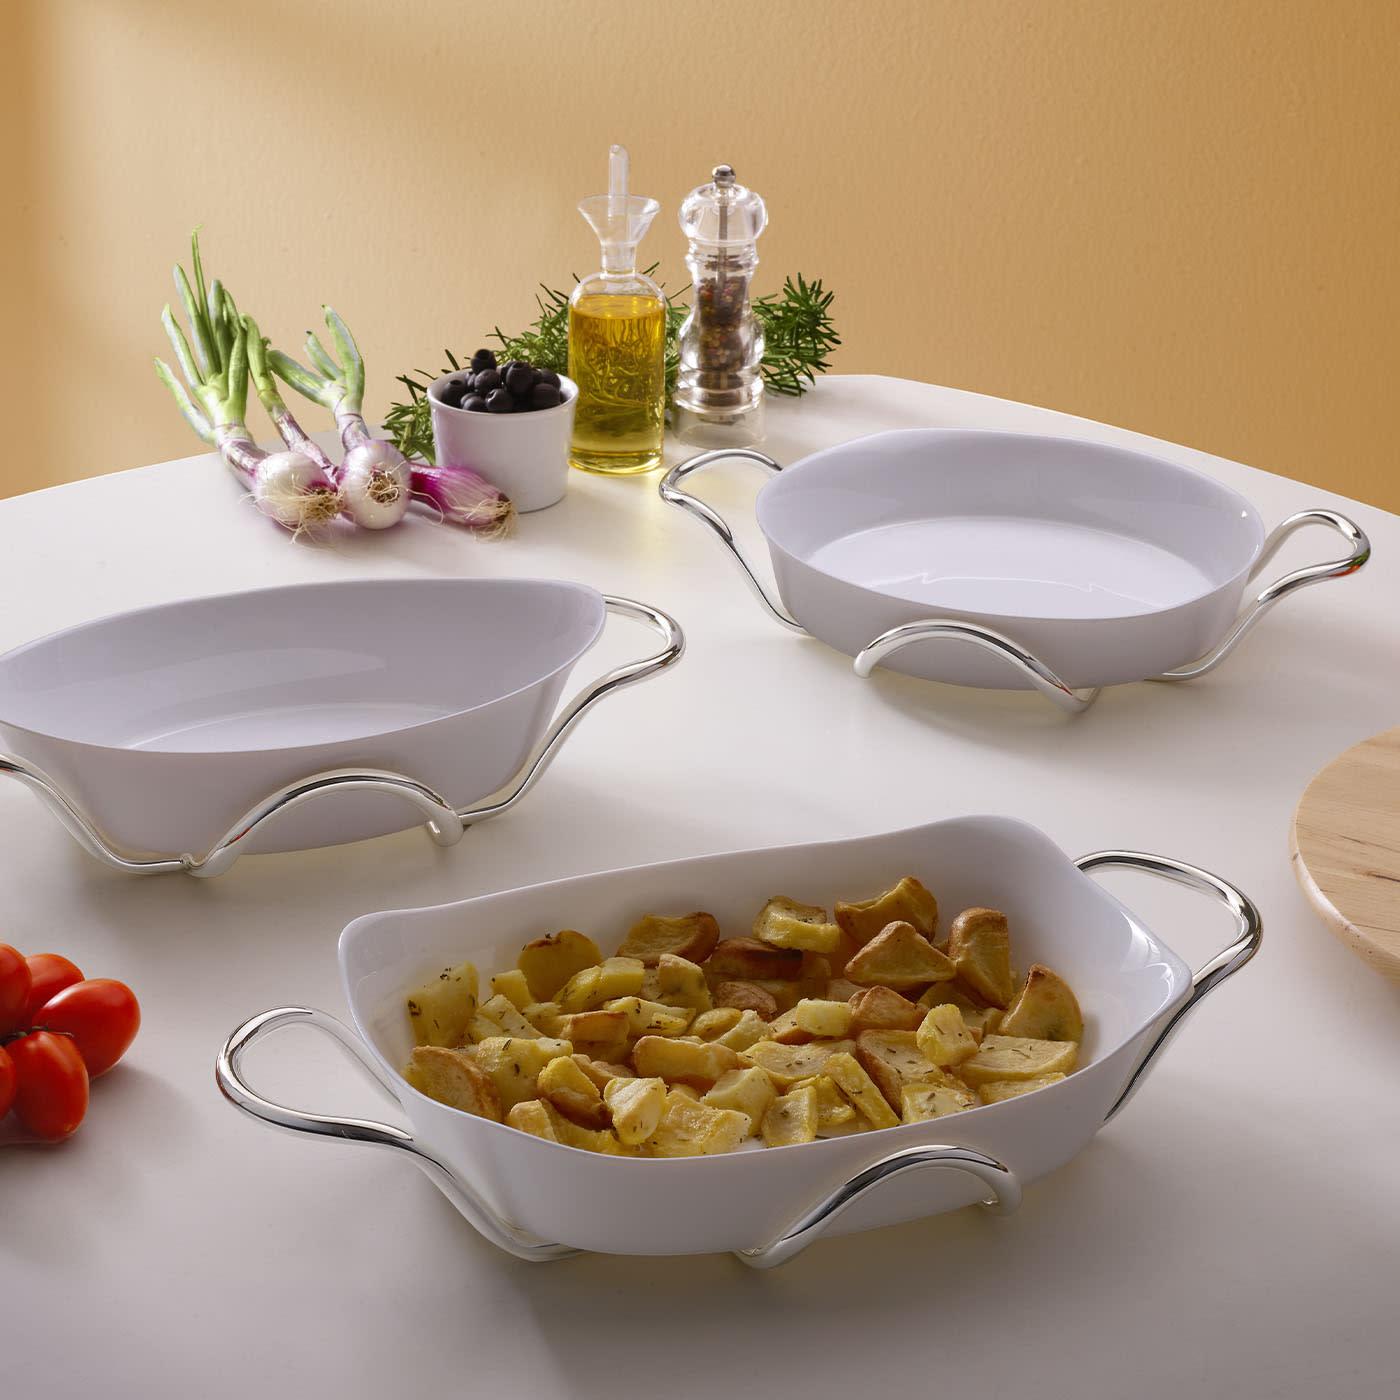 A contemporary spirit clearly conveyed since its fluid lines distinguish this sophisticated ceramic baking dish with brass holders. Enriched with a gleaming silver plating, the cylindrical structure flaunts sinuous curves that well harmonize with